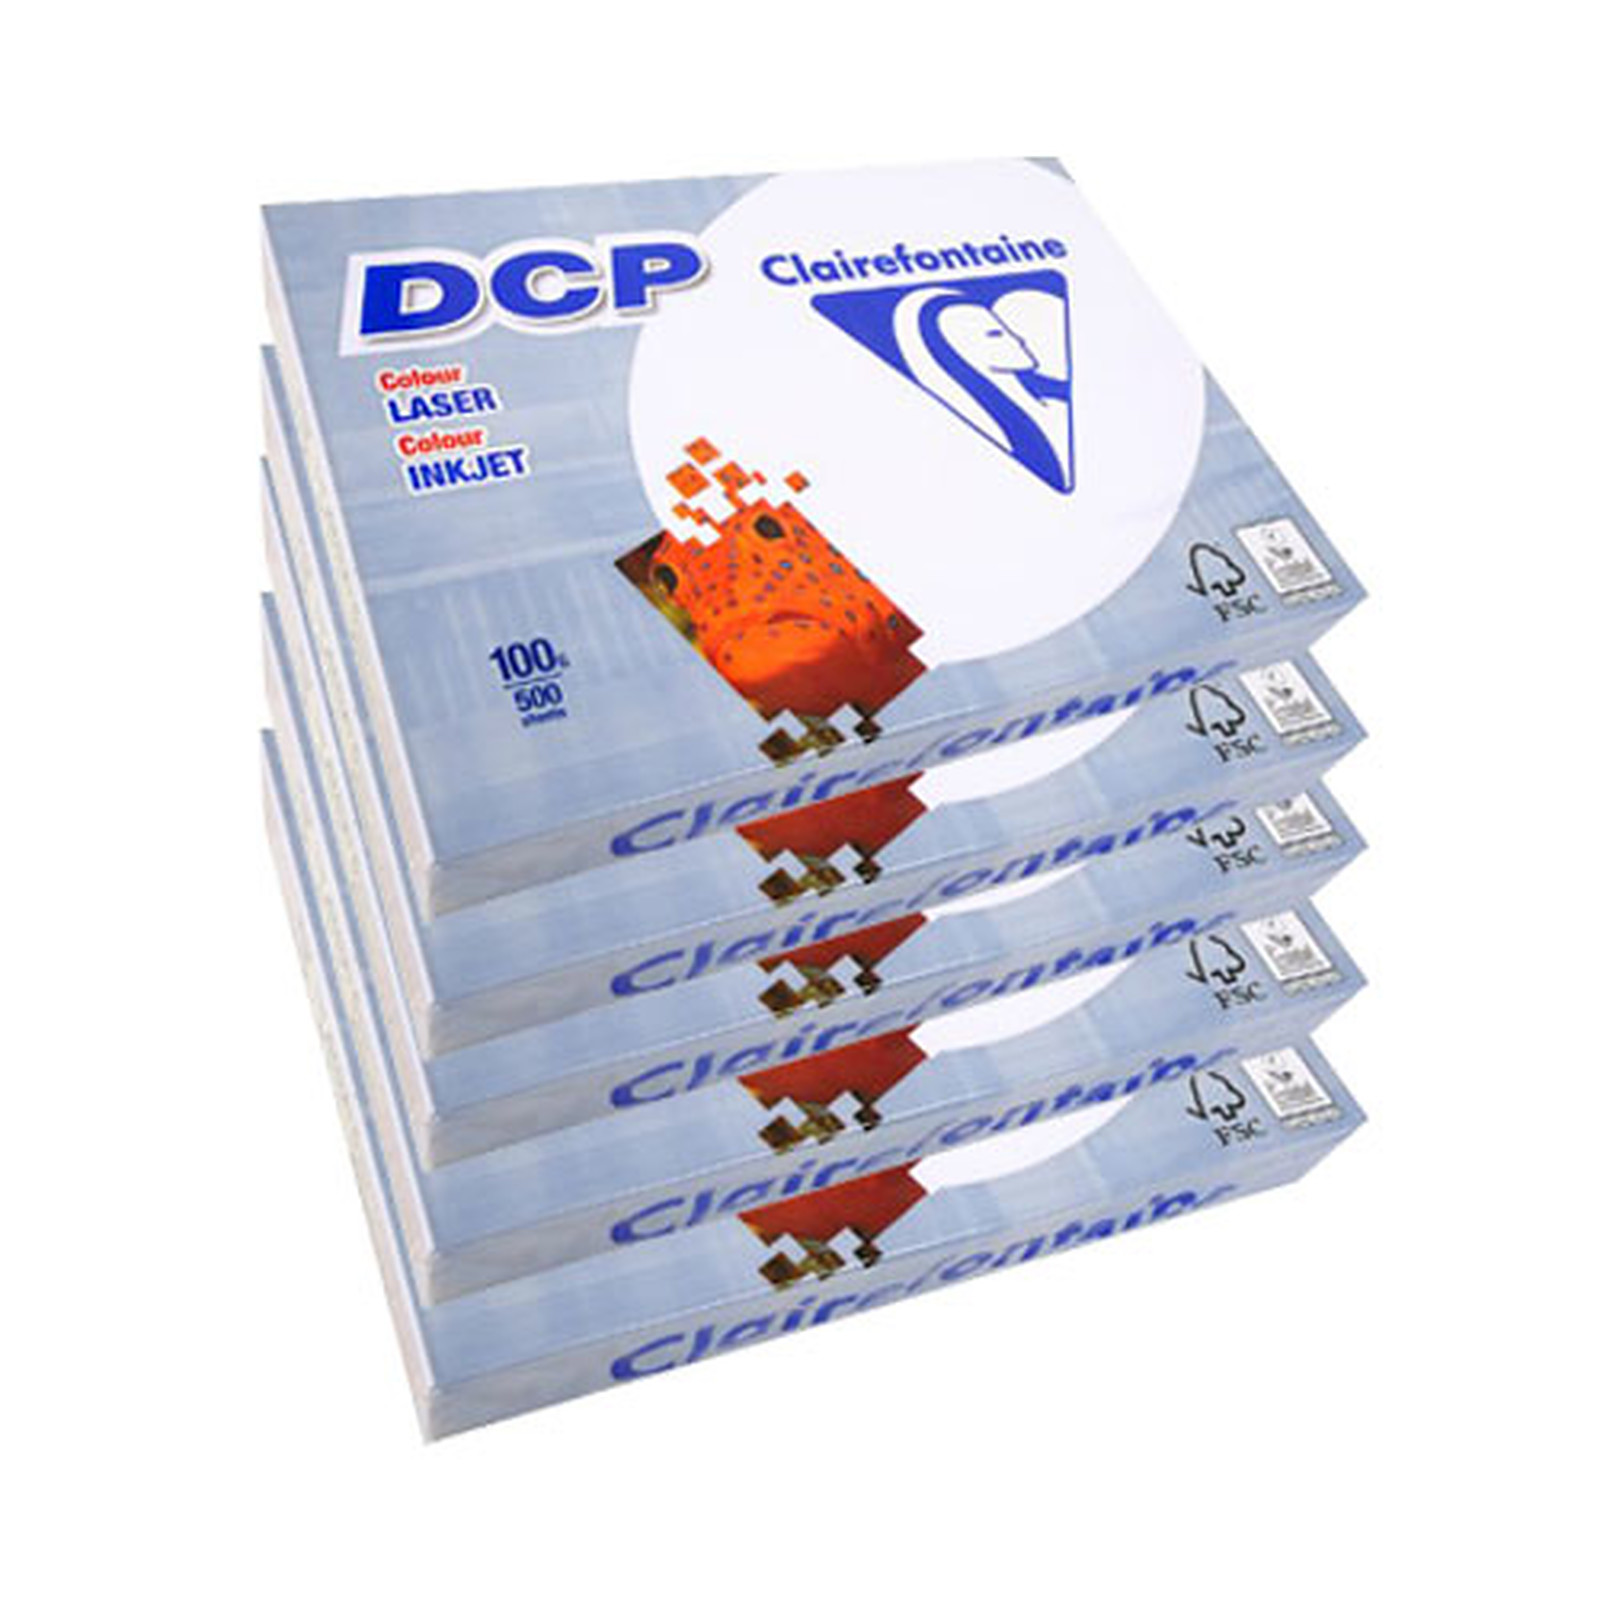 Clairefontaine DCP ramette 500 feuilles A3 100g Blanc x4 - Ramette de papier Clairefontaine